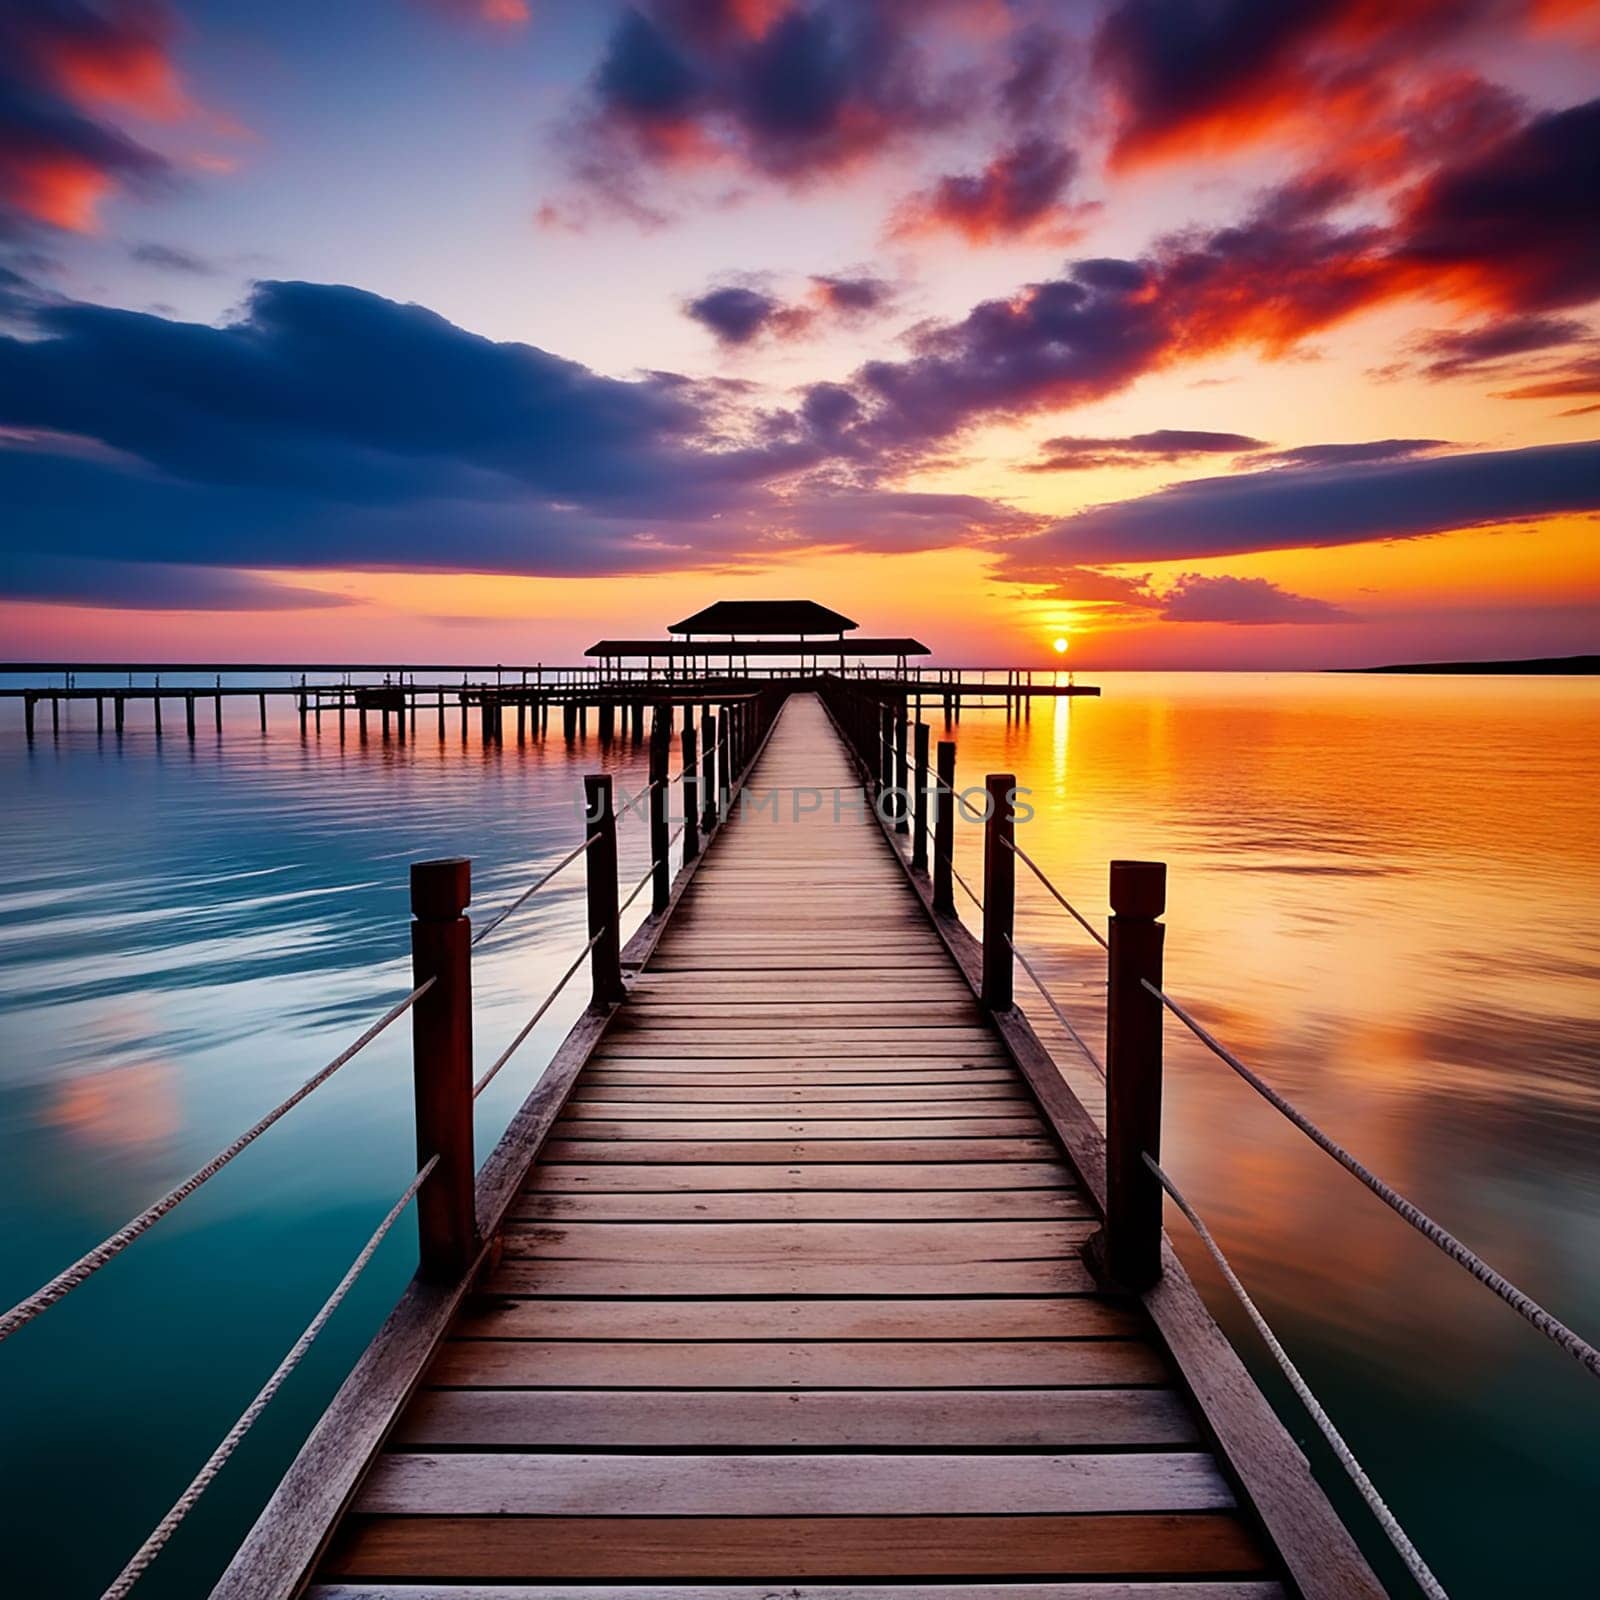 Horizons Unveiled: Pier Silhouette and Captivating Sunset Panorama Over the Sea